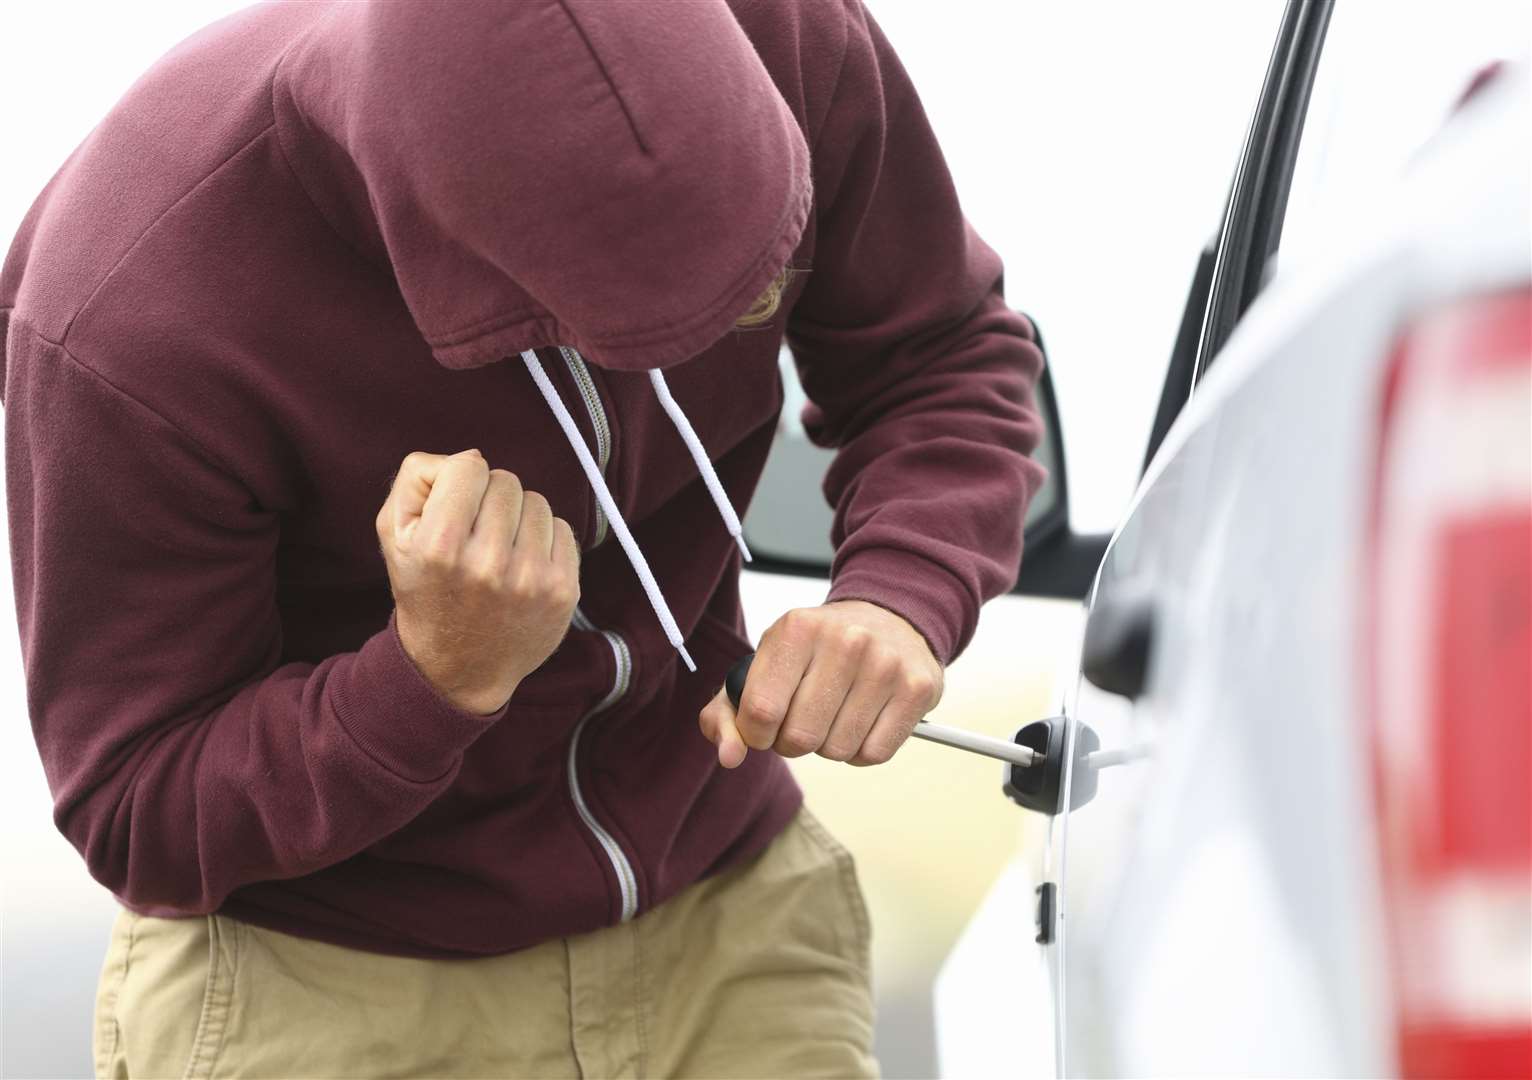 There has been a sharp rise in car thefts in the county